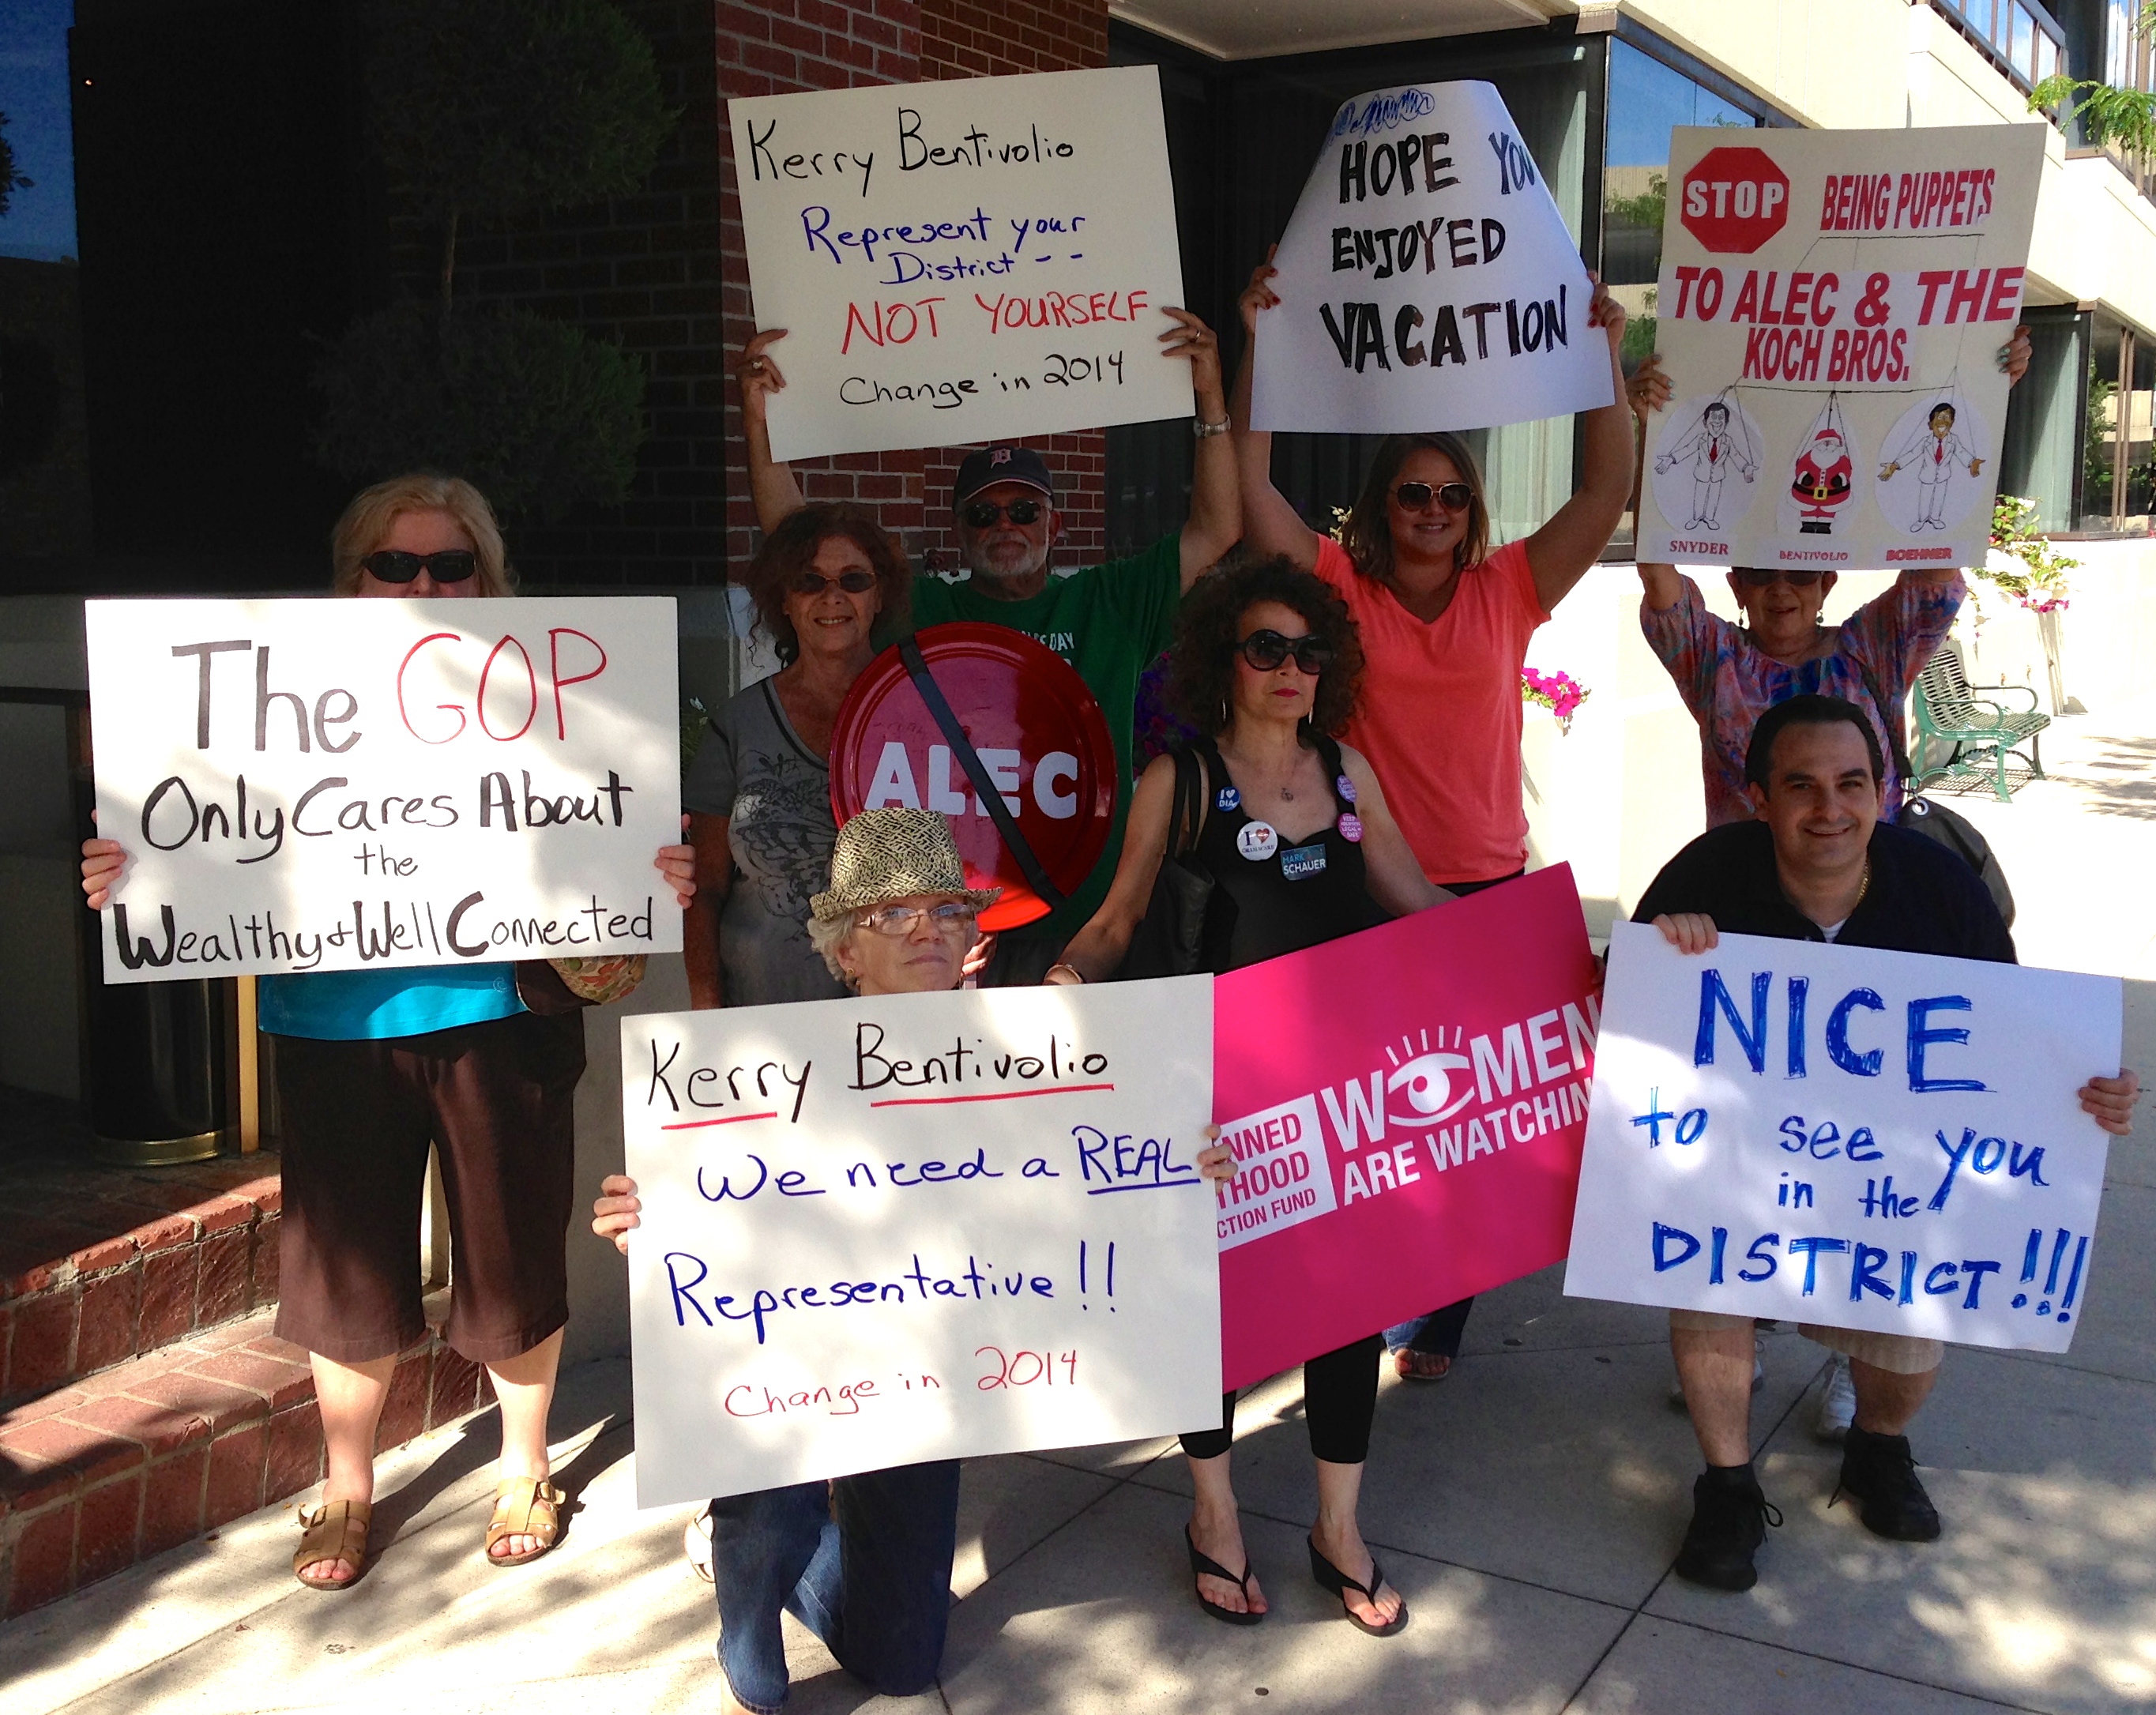 Protesters gather to remind Rep. Kerry Bentivolio who he works for